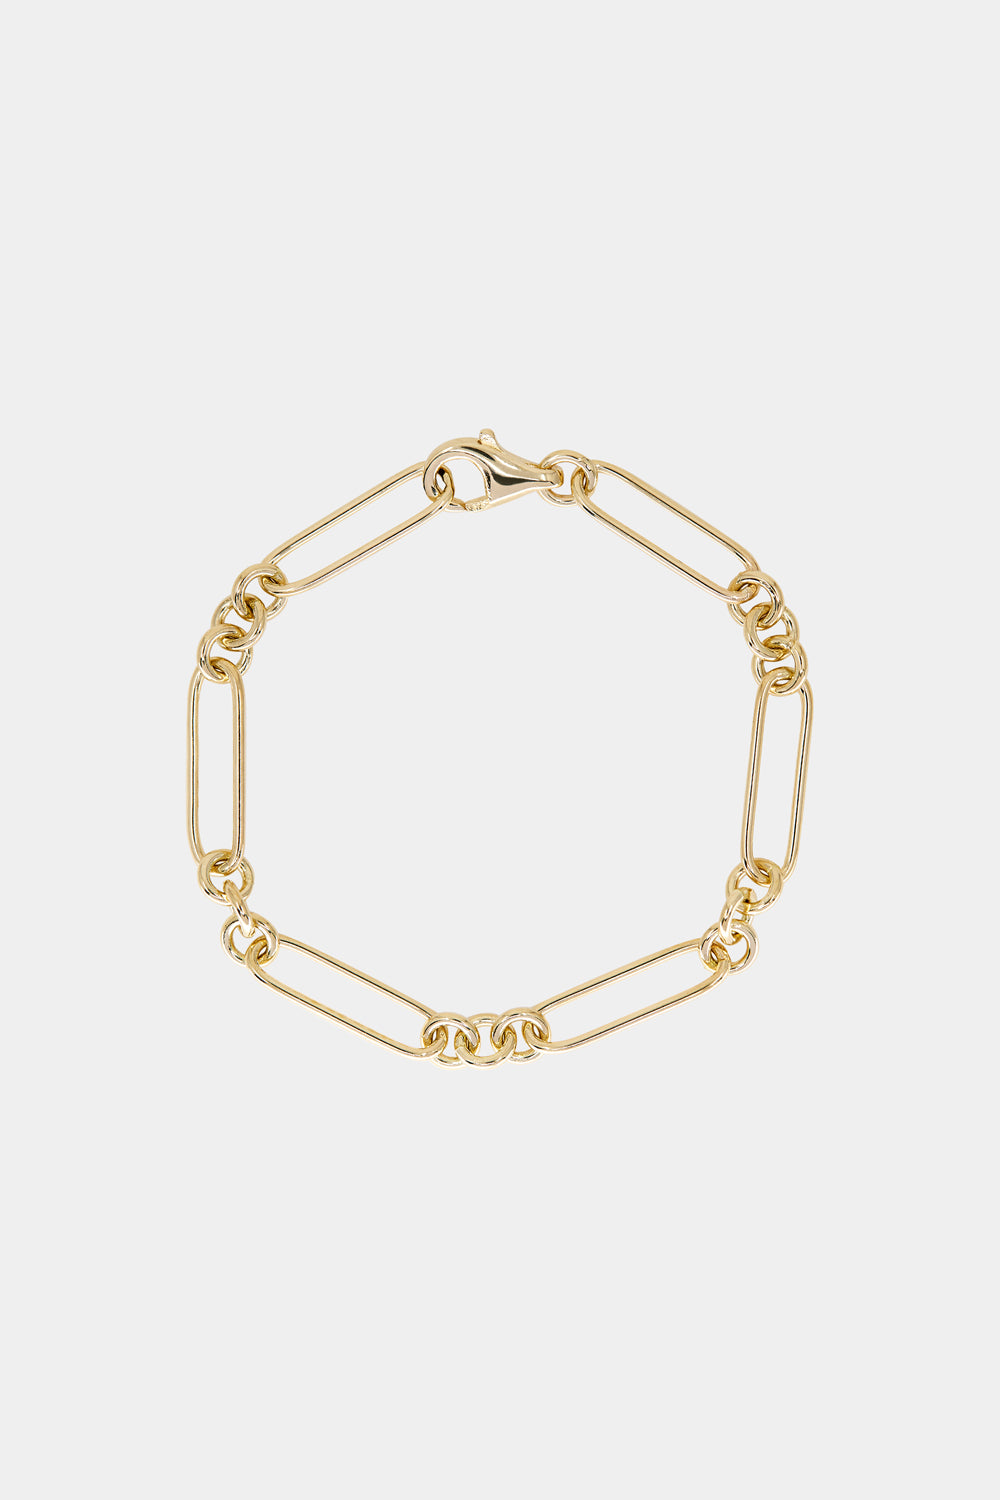 Lennox Bracelet | Yellow Gold, More Options Available